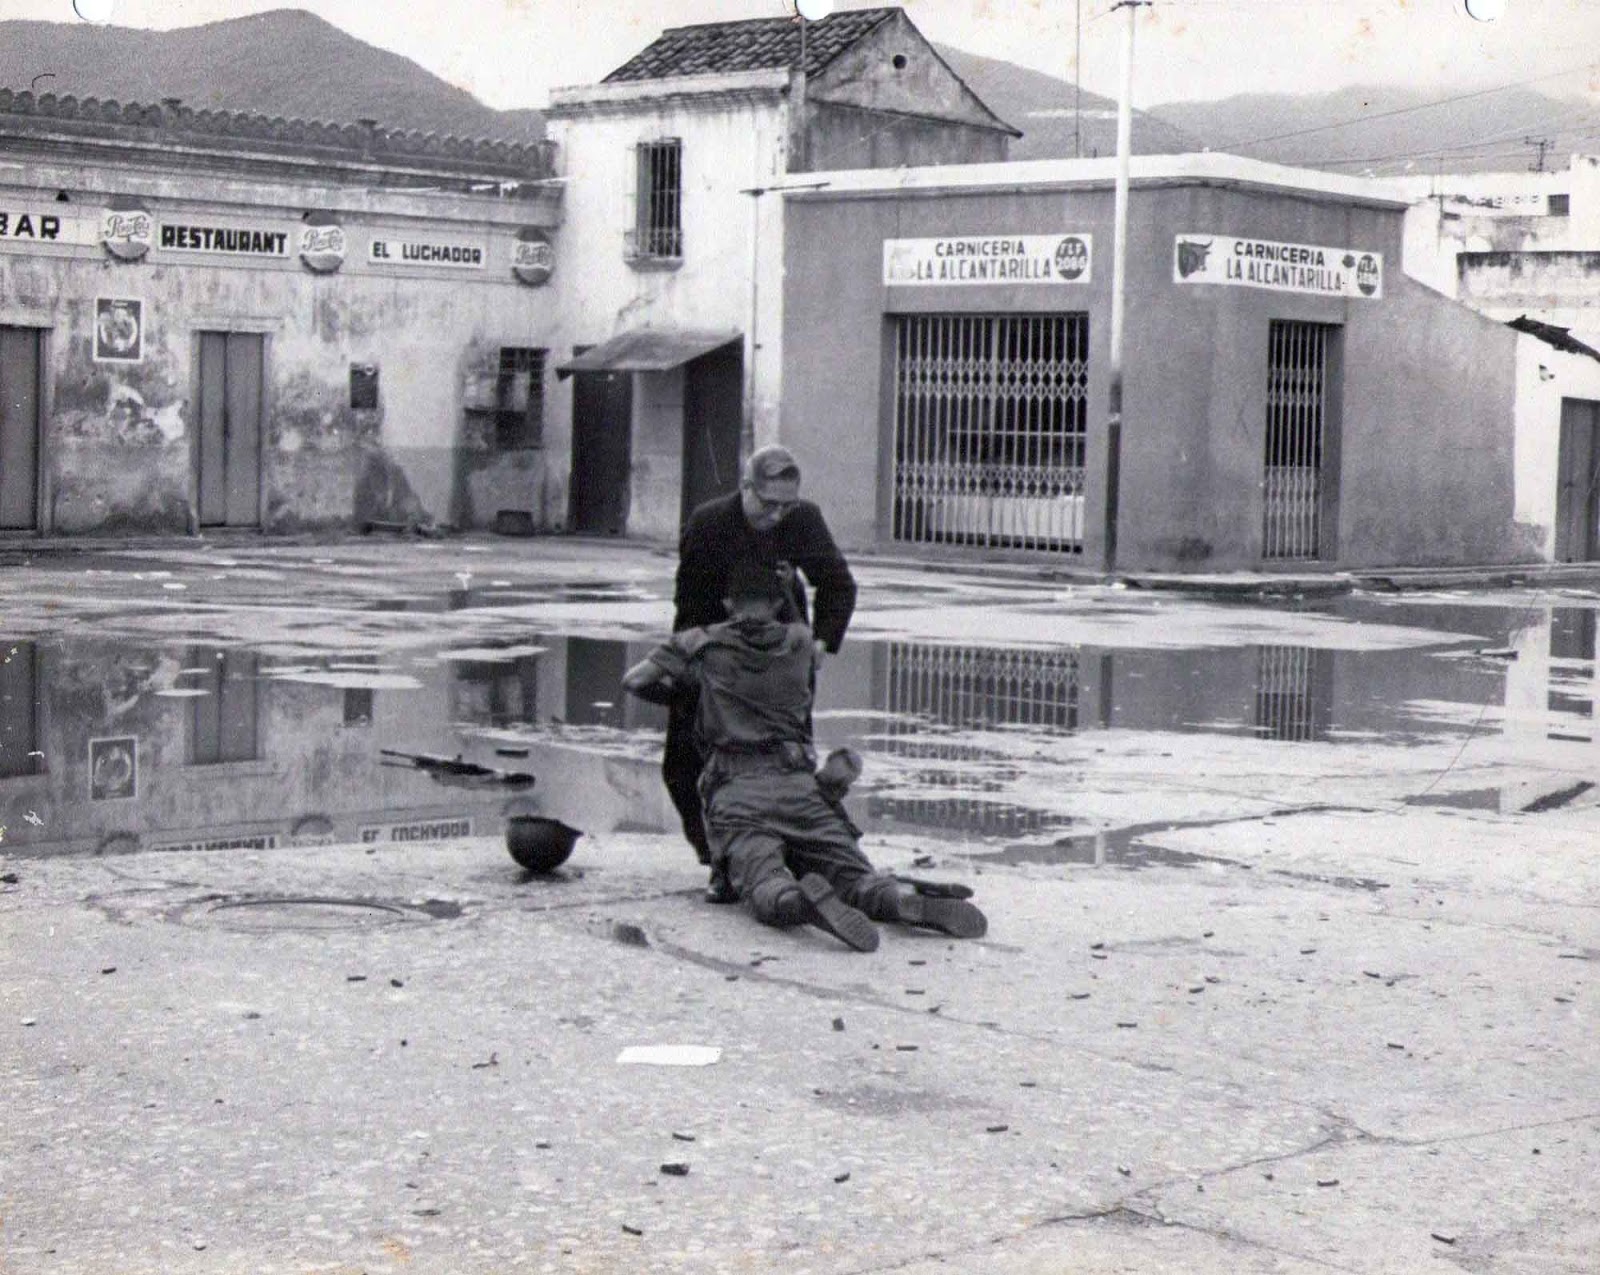 The uprising against the Venezuelan government of Rómulo Betancourt was quickly crushed but not before Hector Rondon was able to capture these iconic photos.